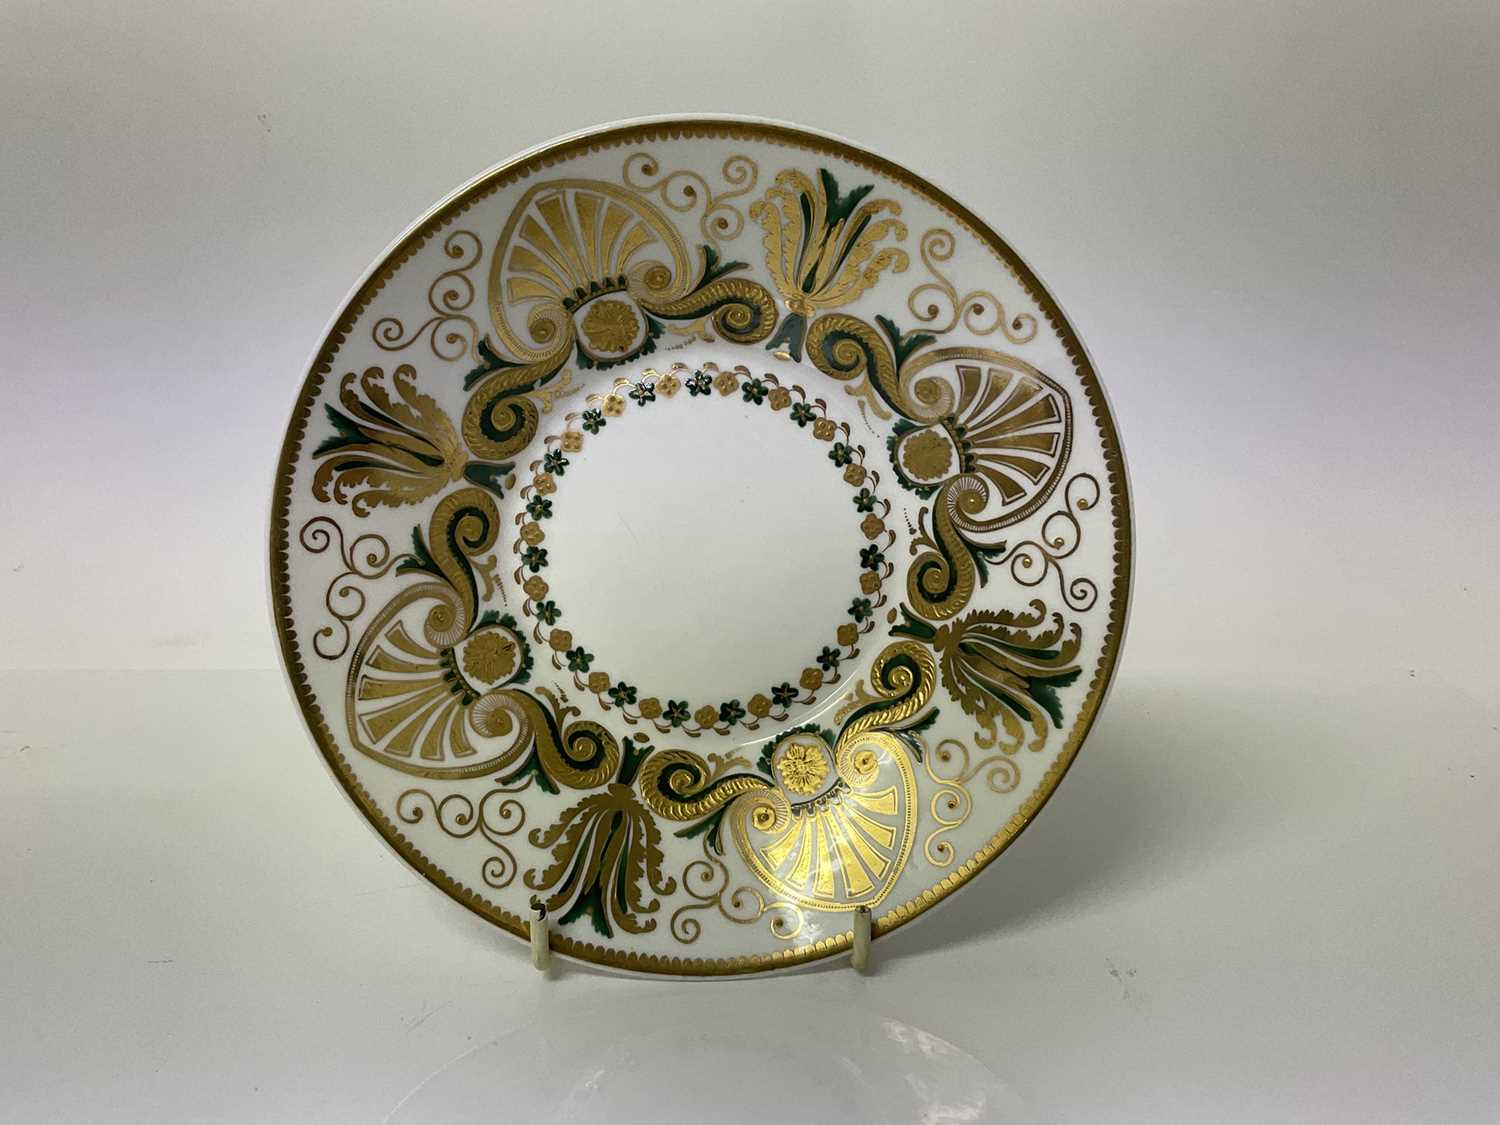 Lot 100 - Regency period Spode porcelain saucer dish with good quality gilt and green decoration on white ground, pattern 3983, 18cm diameter